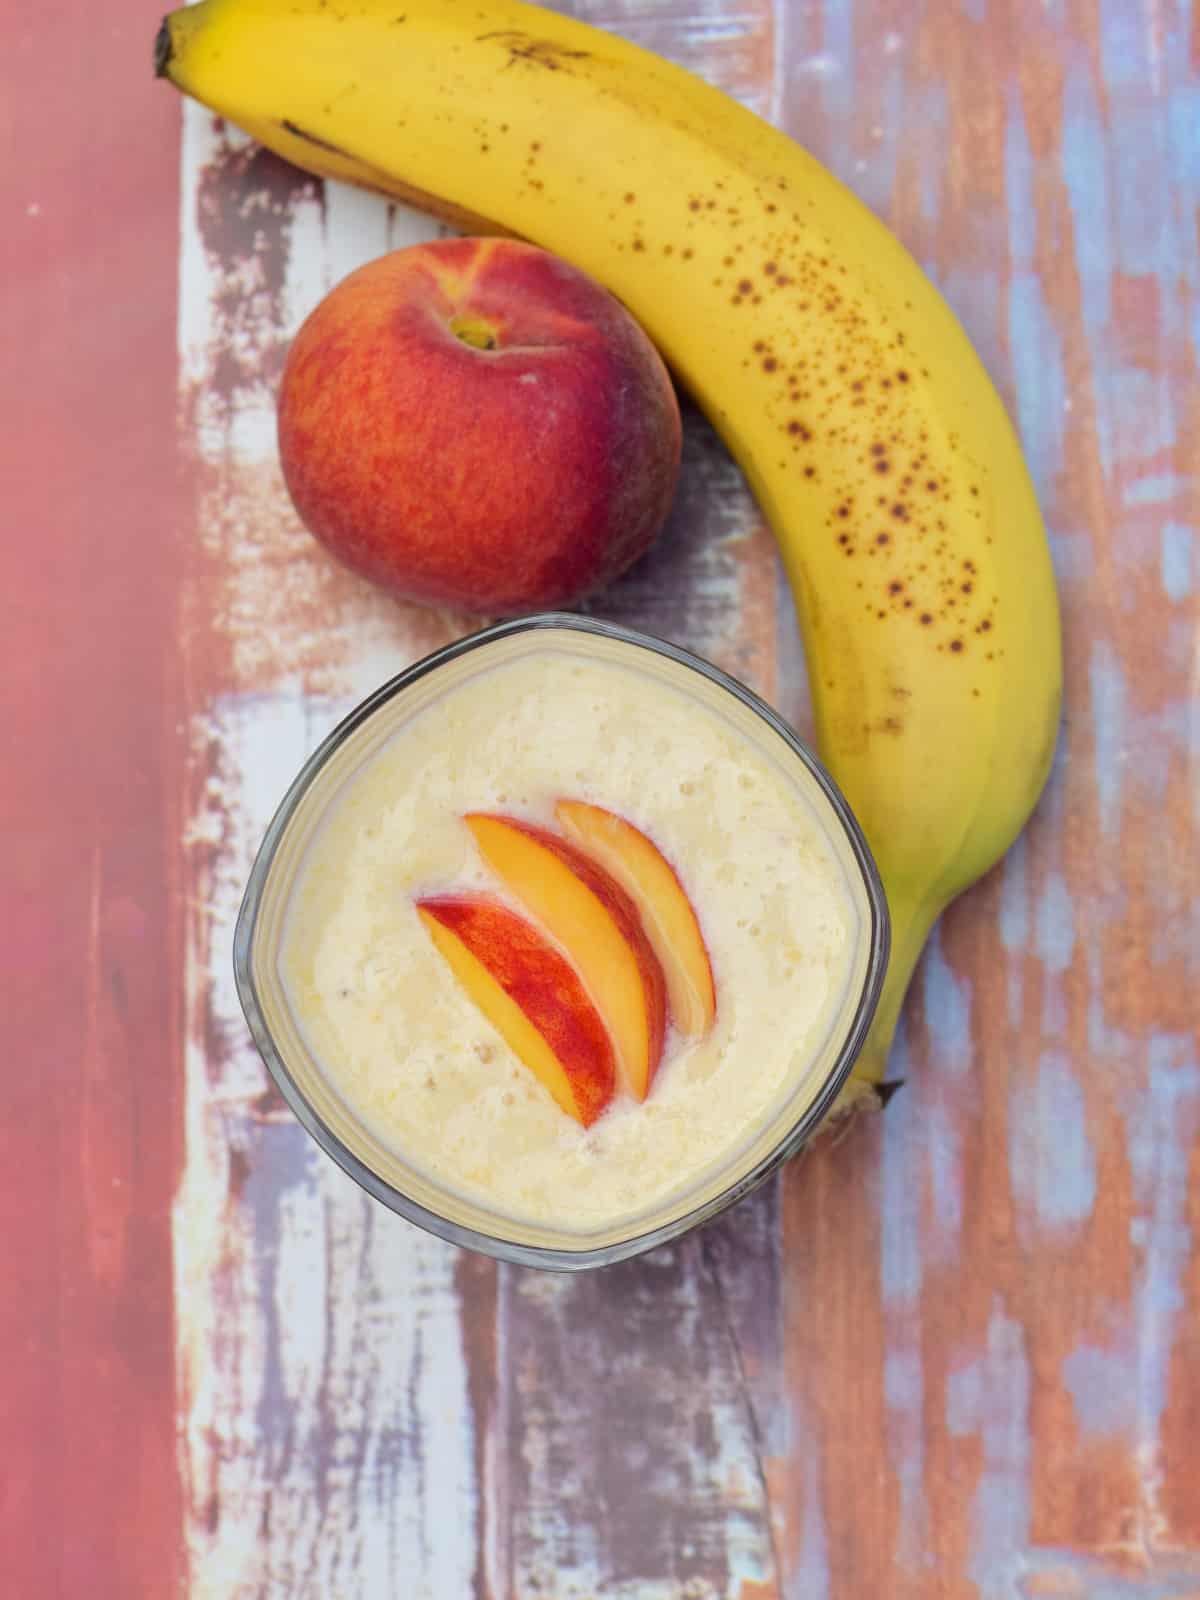 banana peach smoothie in a glass cup garnished fresh peach pieces